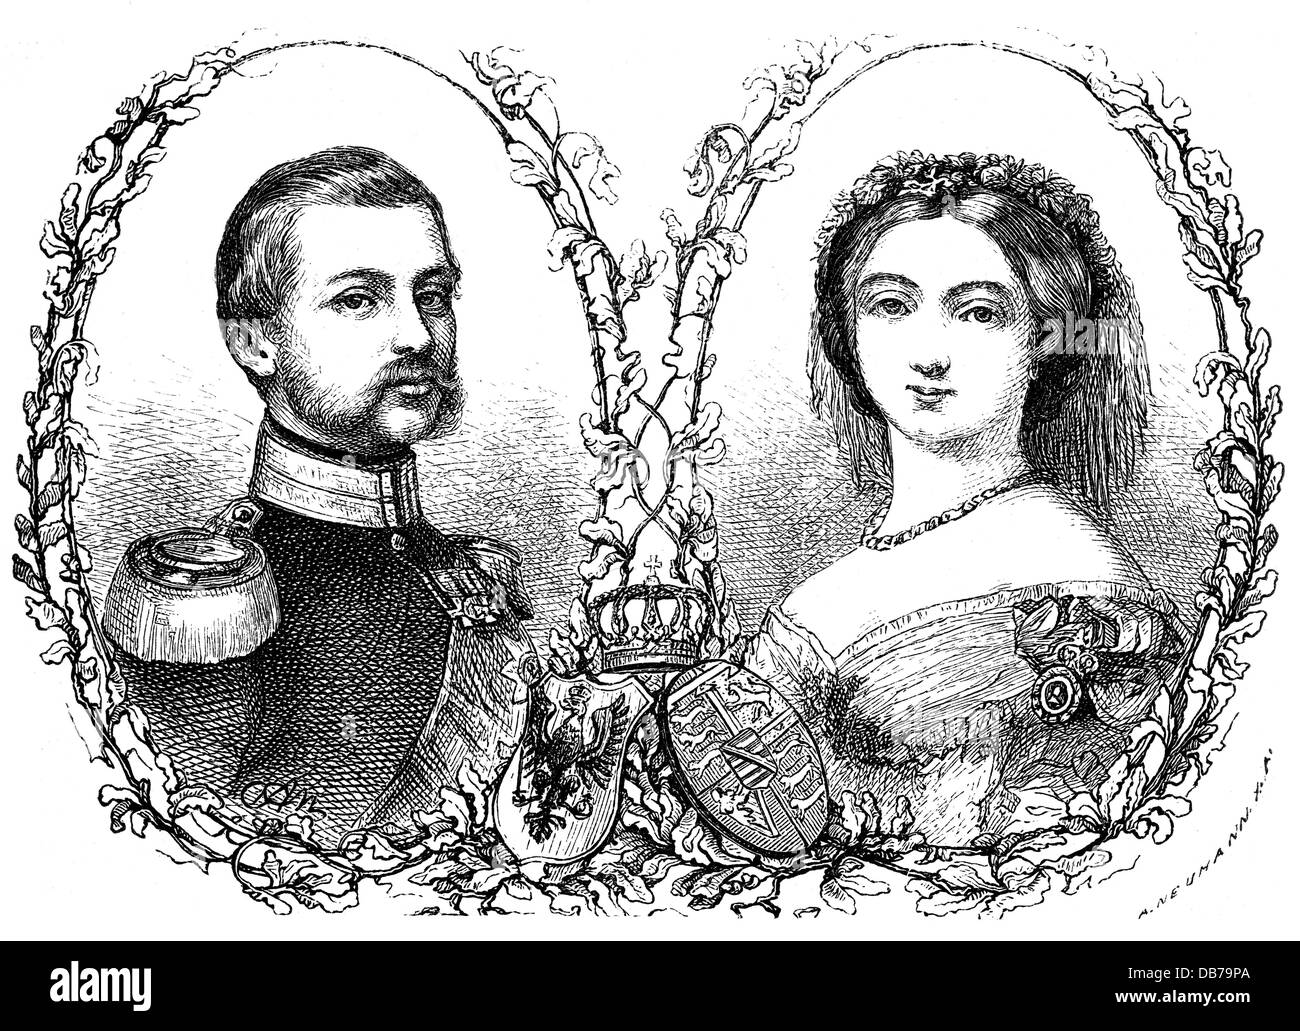 Frederick III, 18.10.1831 - 15.6.1888, German Emperor 9.3.1888 - 15.6.1888, portrait, with fiance princess Victoria of Great Britain, wood engraving, circa 1857, Stock Photo